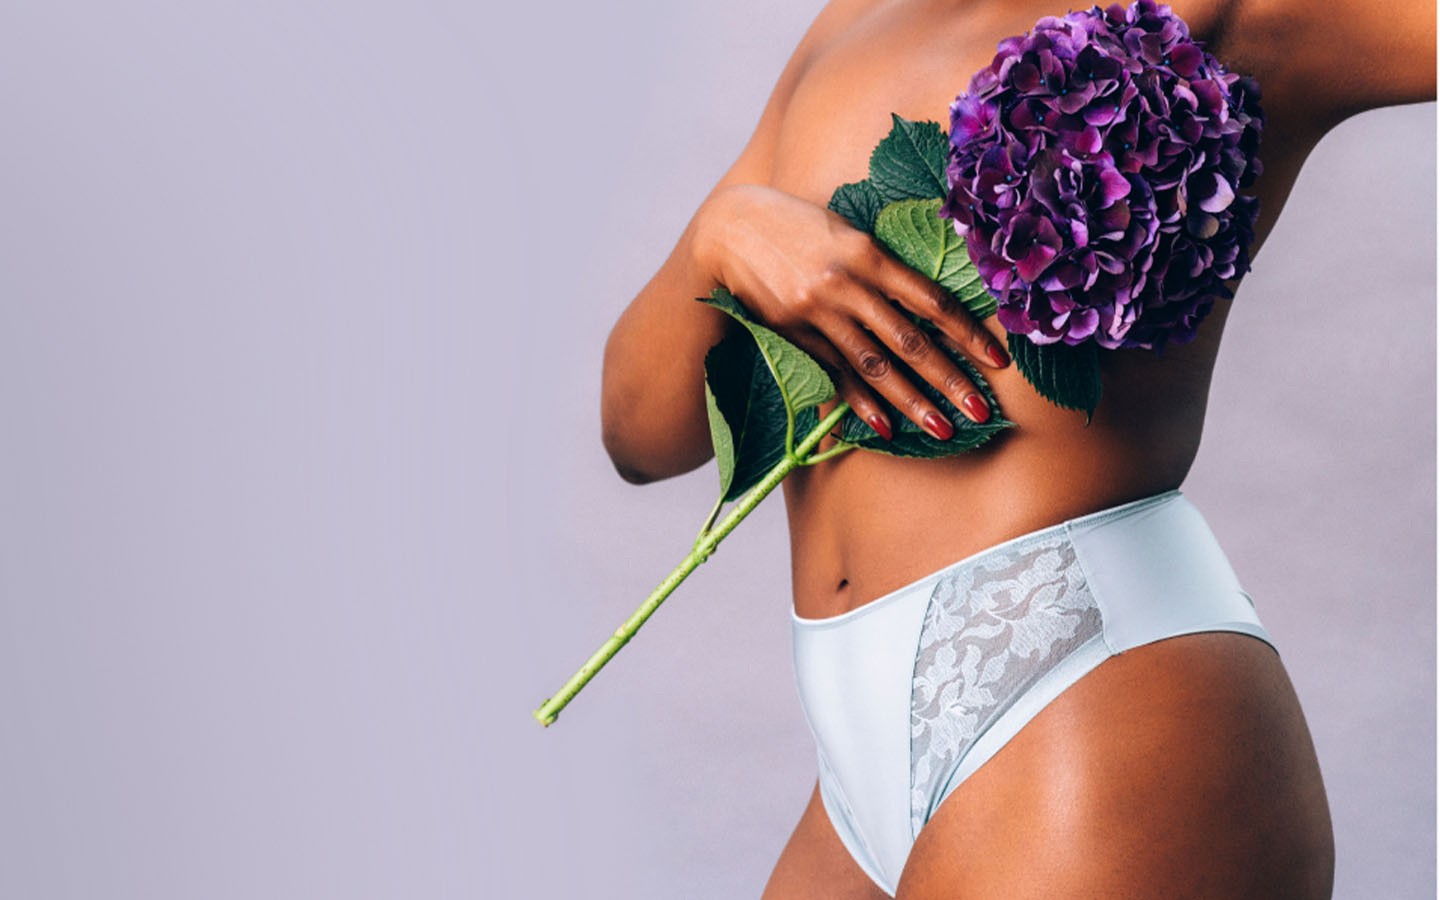 Woman holding purple flowers to cover breasts